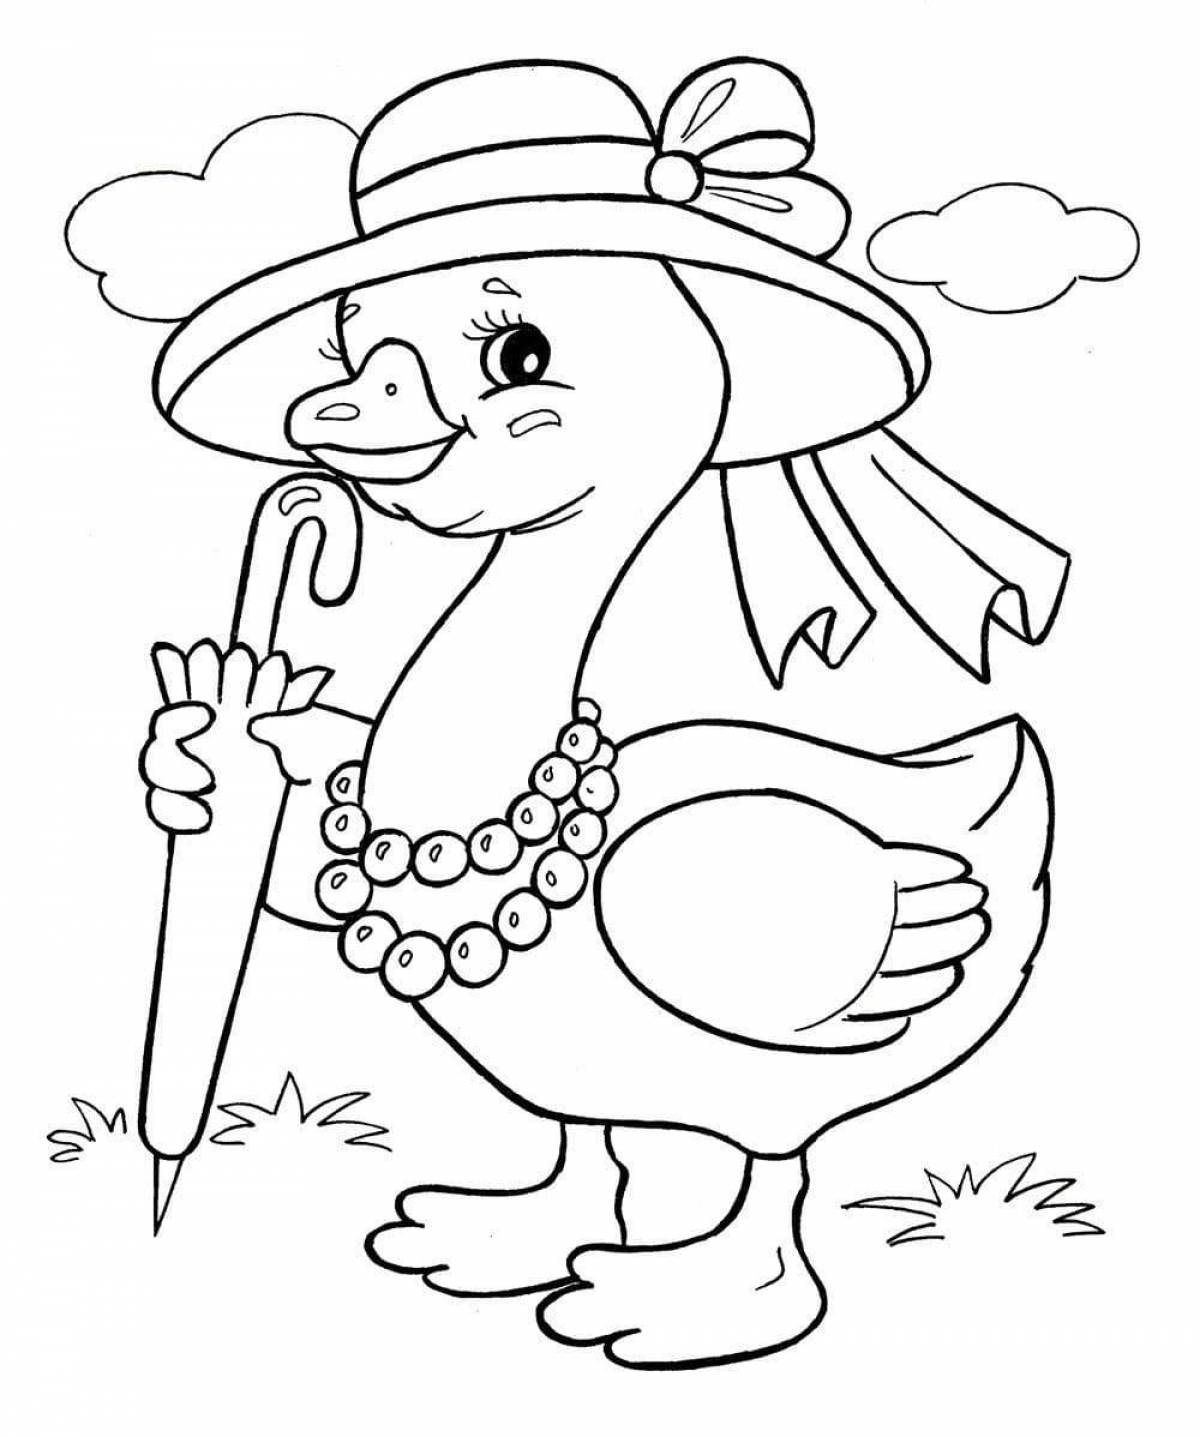 Fun coloring book for 5 year olds